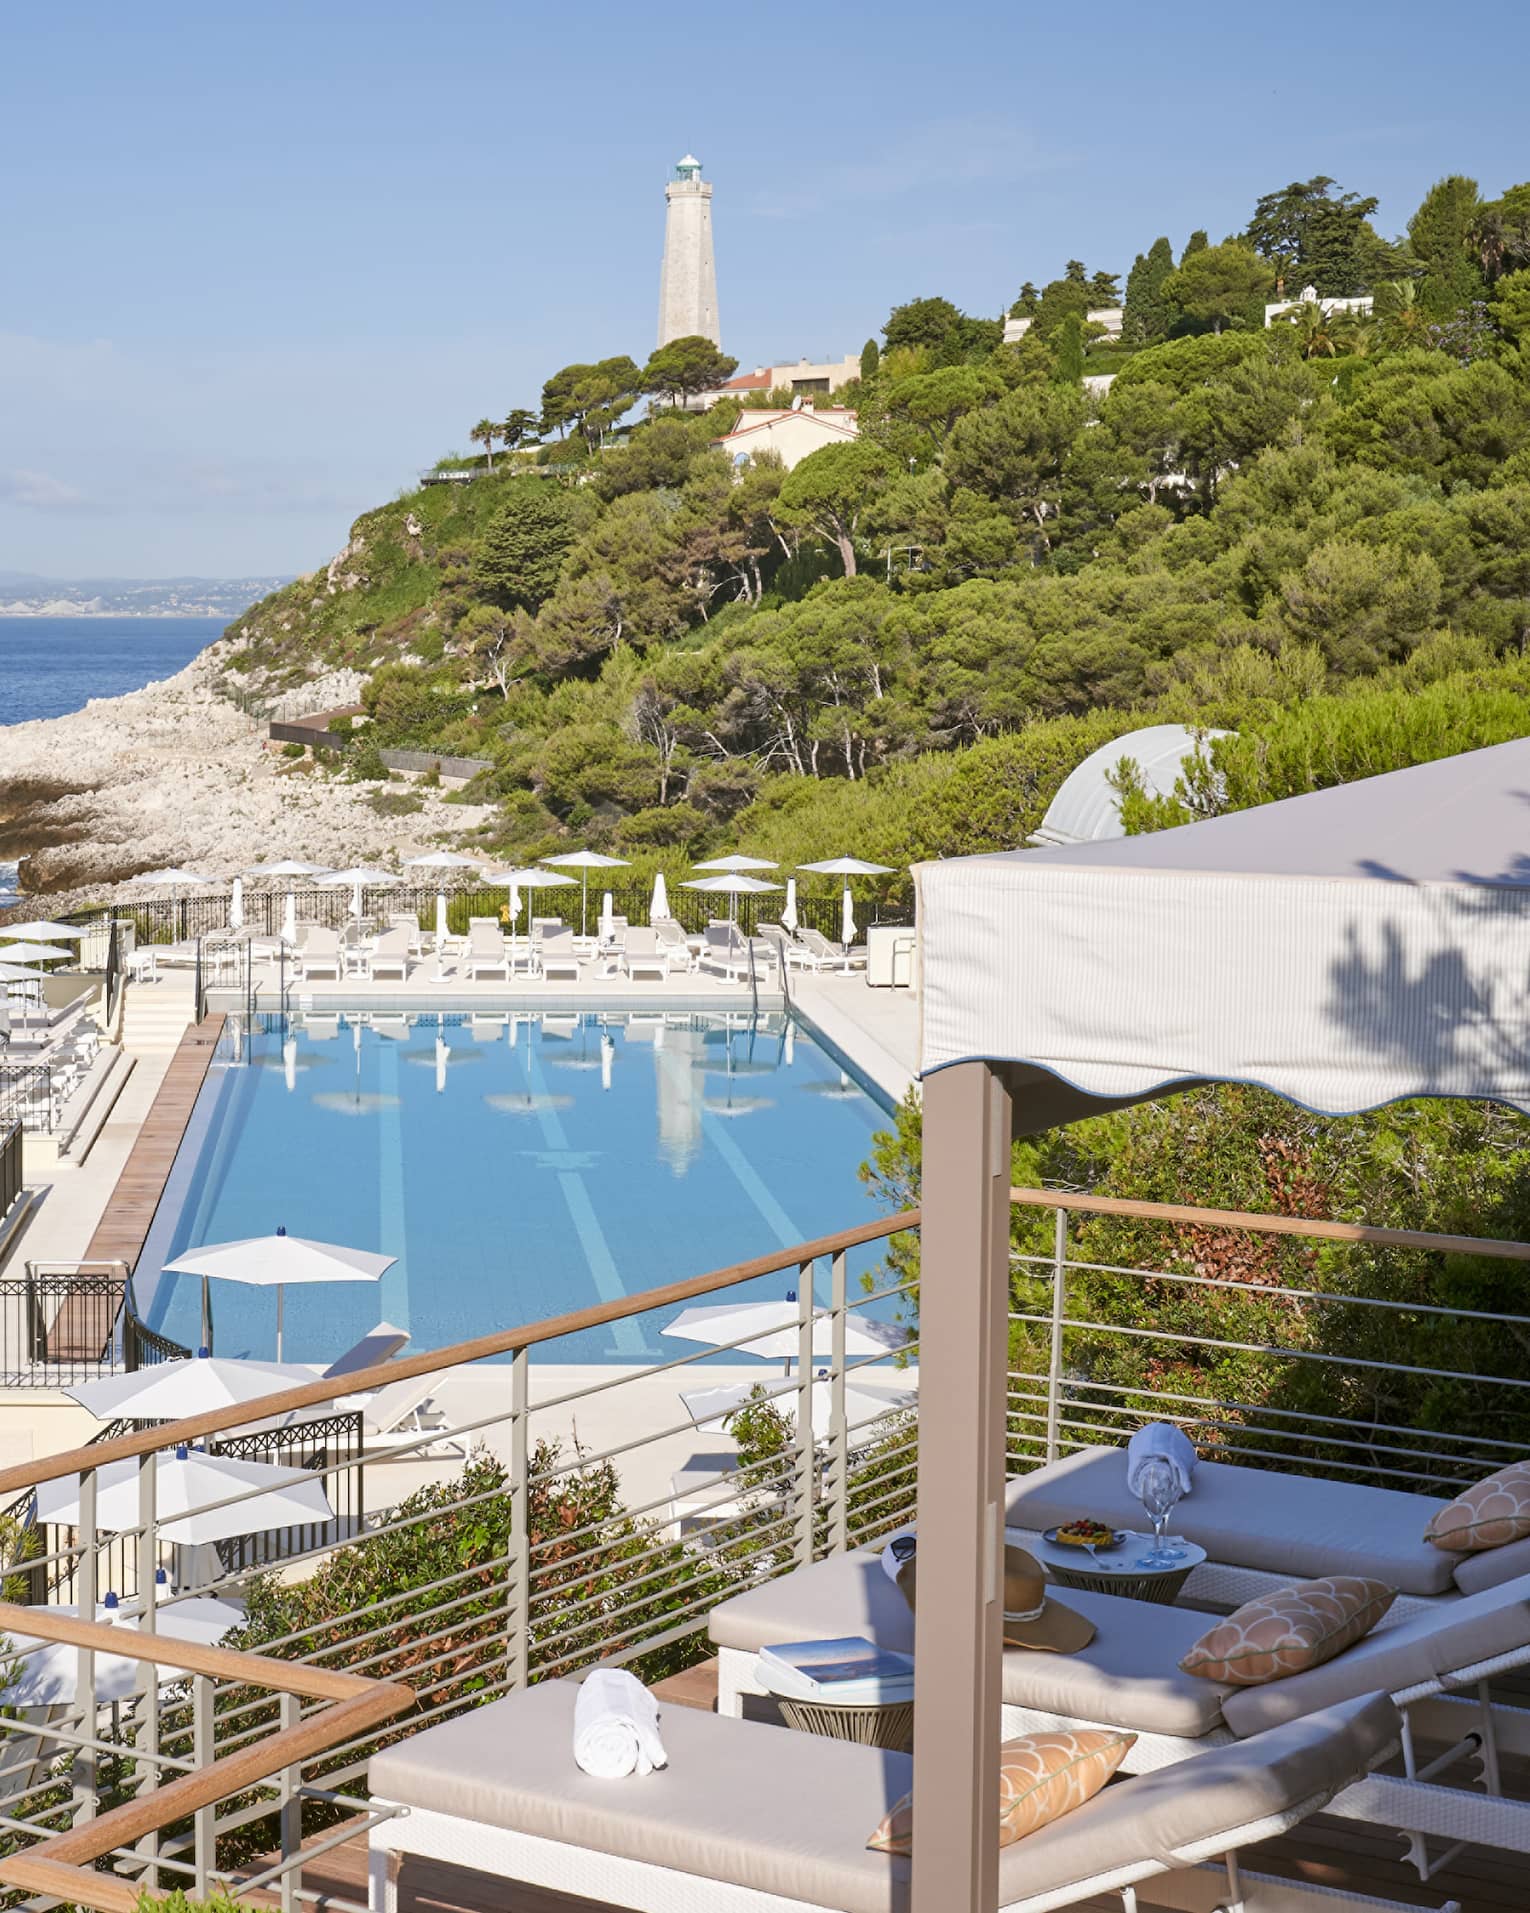 View from terrace of Club Dauphin pool, Mediterranean, green hillside and lighthouse